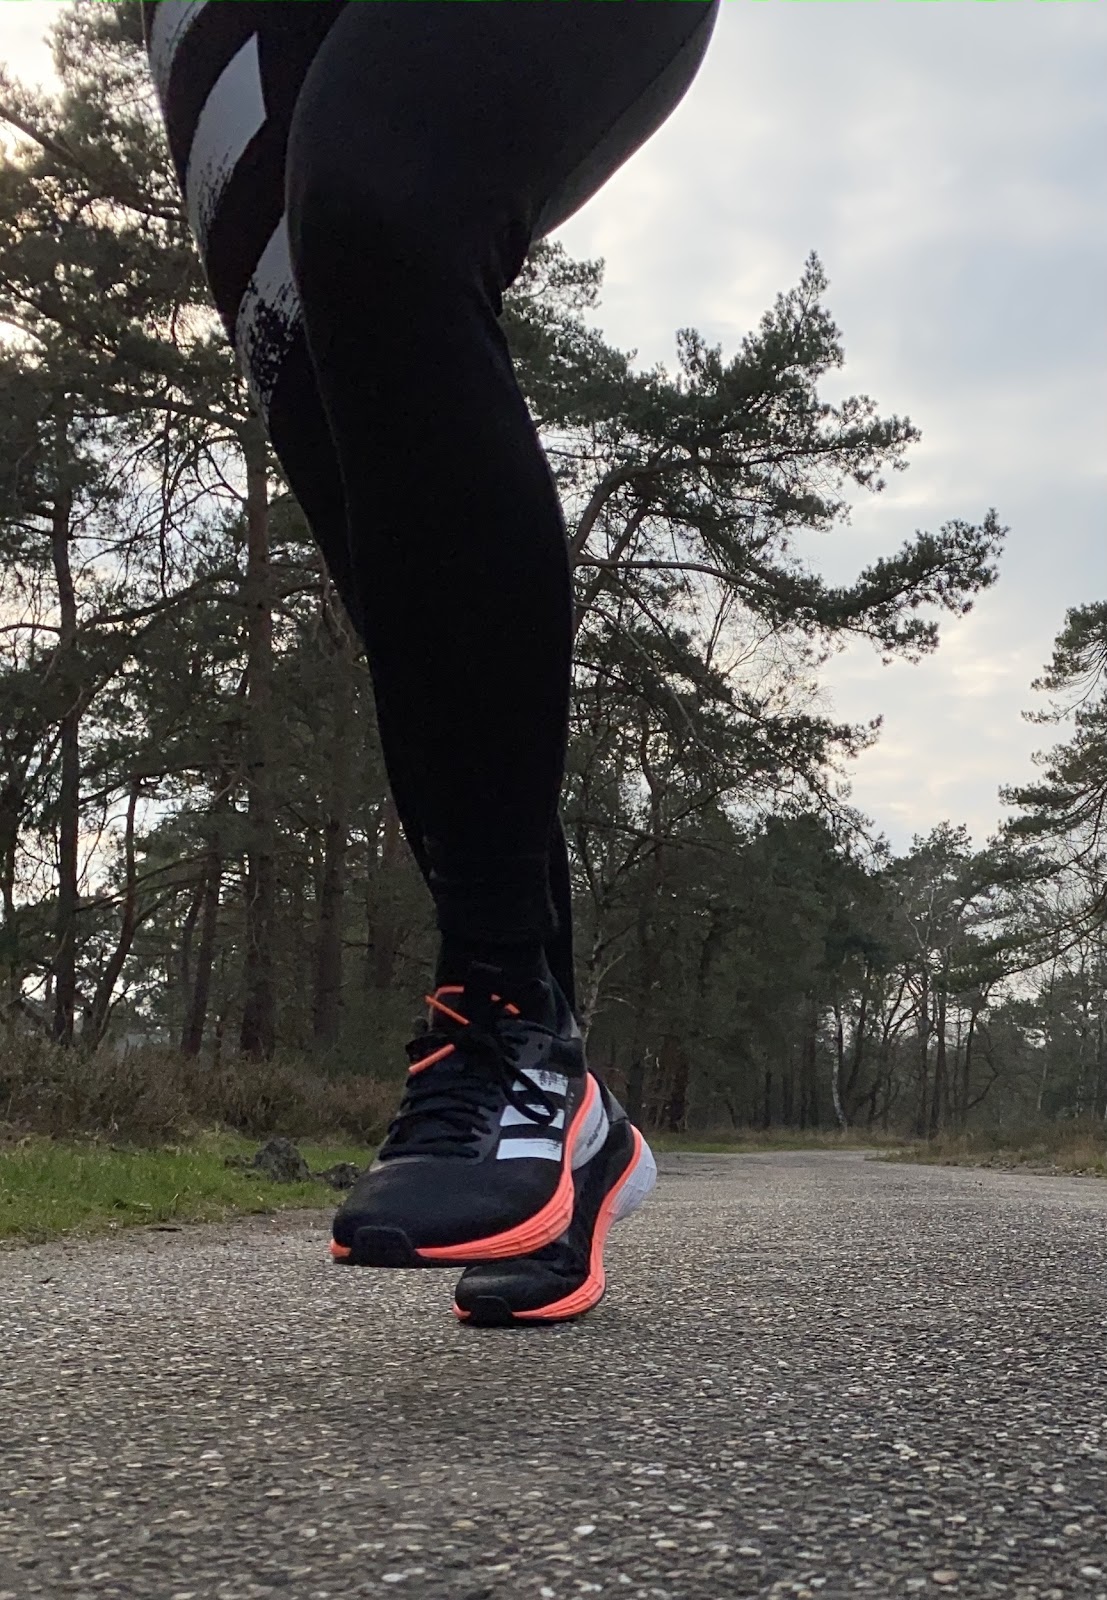 Adidas SL20 – A fast shoe for everyone? – Heart Runner Girl